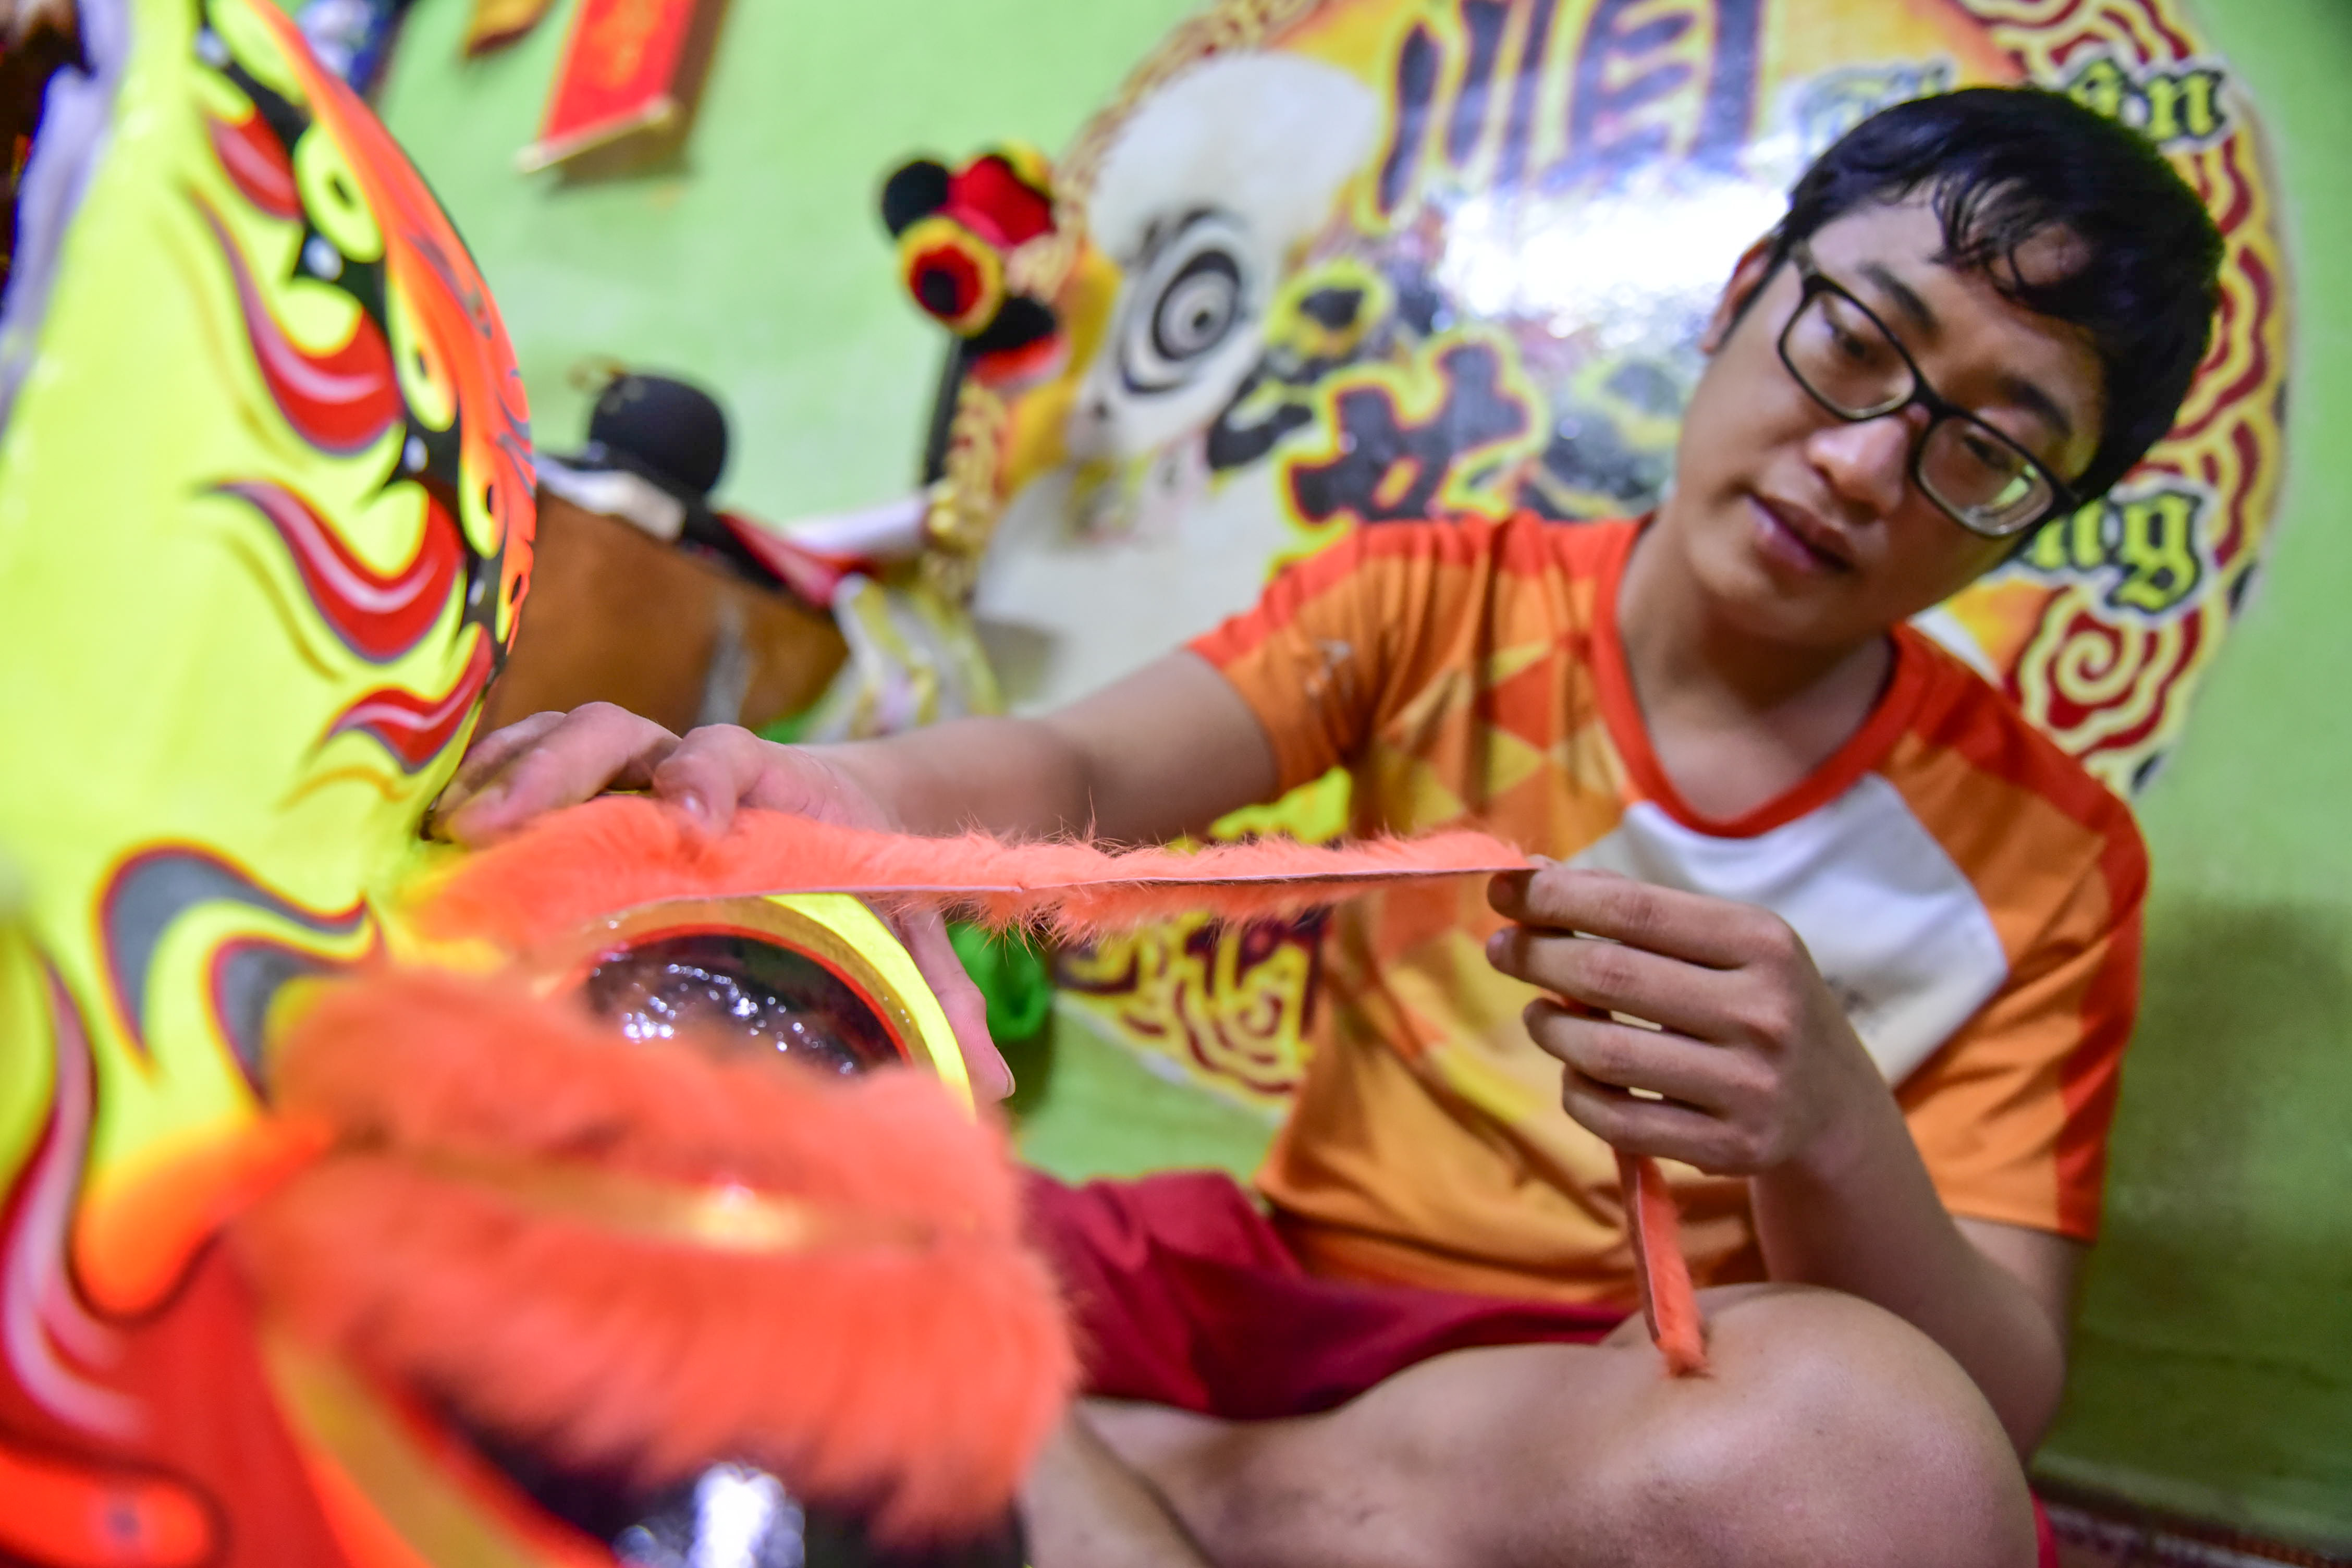 A craftsman decorates lion heads with fur to make them more animated and attractive. Photo: Ngoc Phuong / Tuoi Tre News